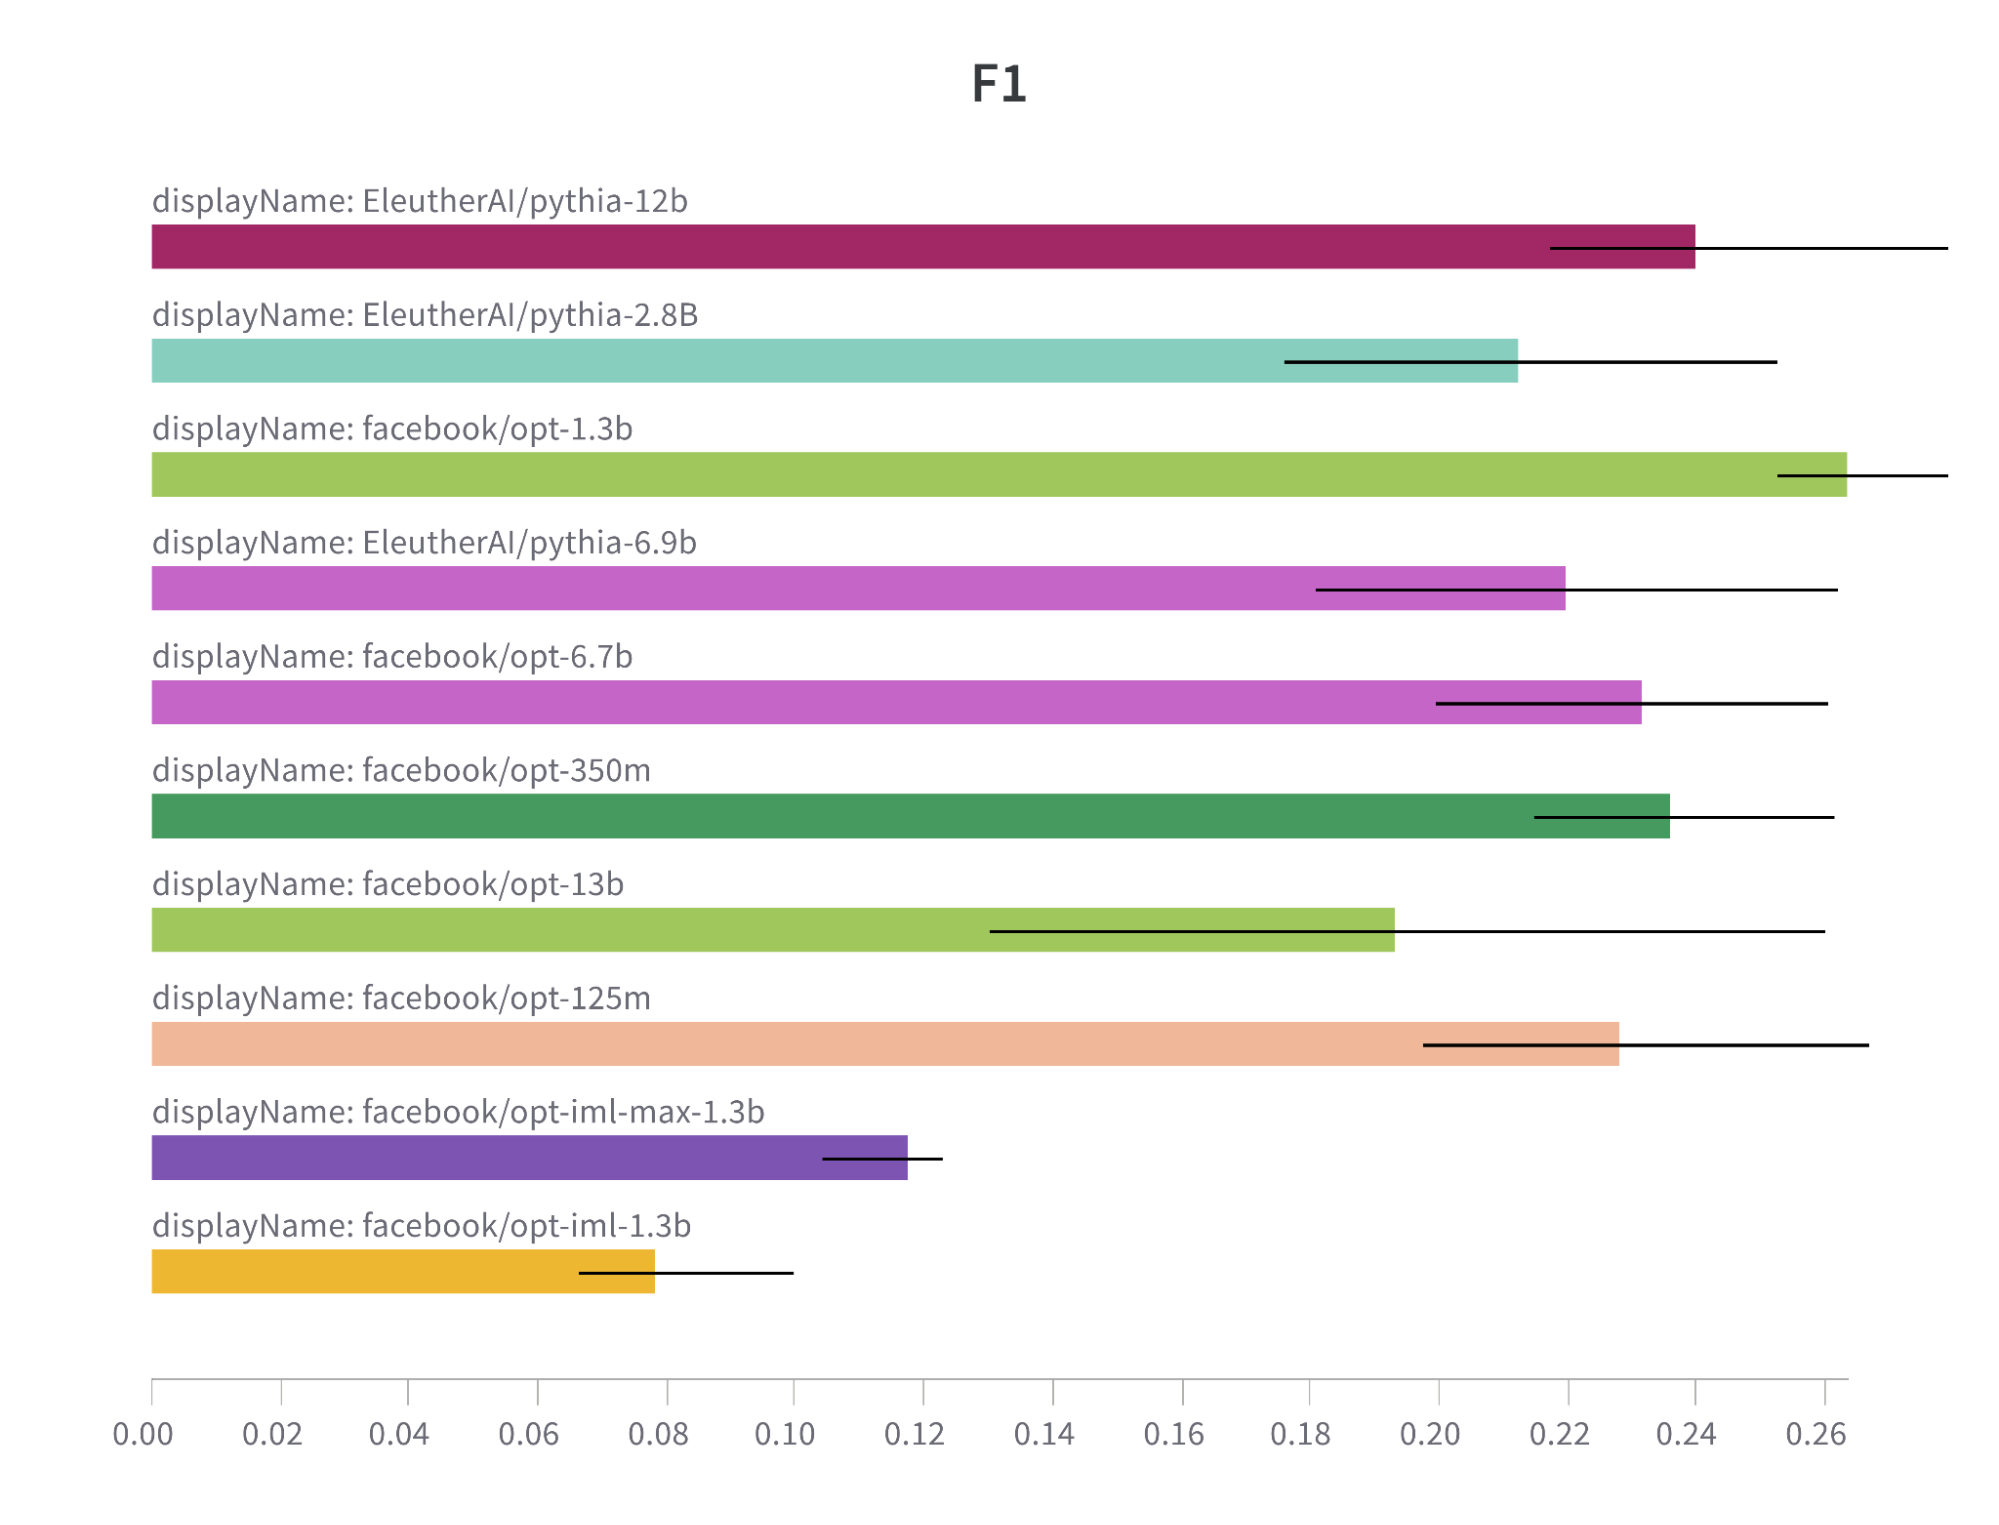 F1 Metric Comparison Bar Chart for OPT and Pythia models